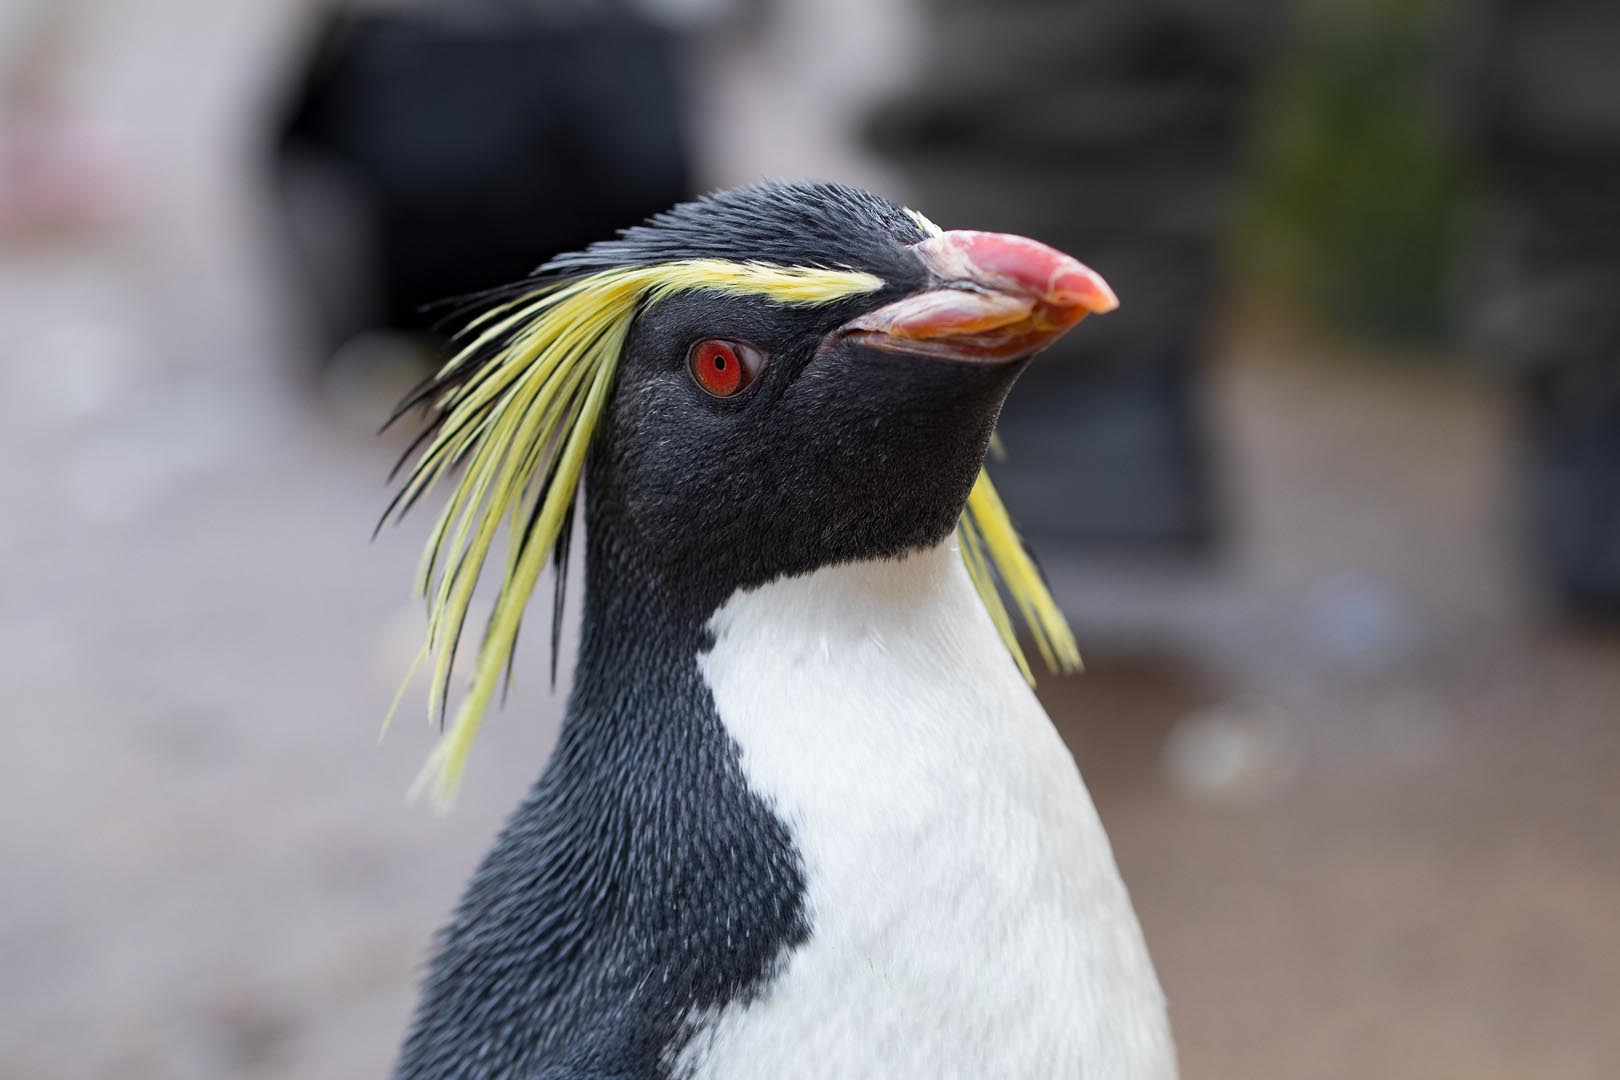 Northern rockhopper penguin looking directly at camera [eye-contact] IMAGE: Sian Addison 2018